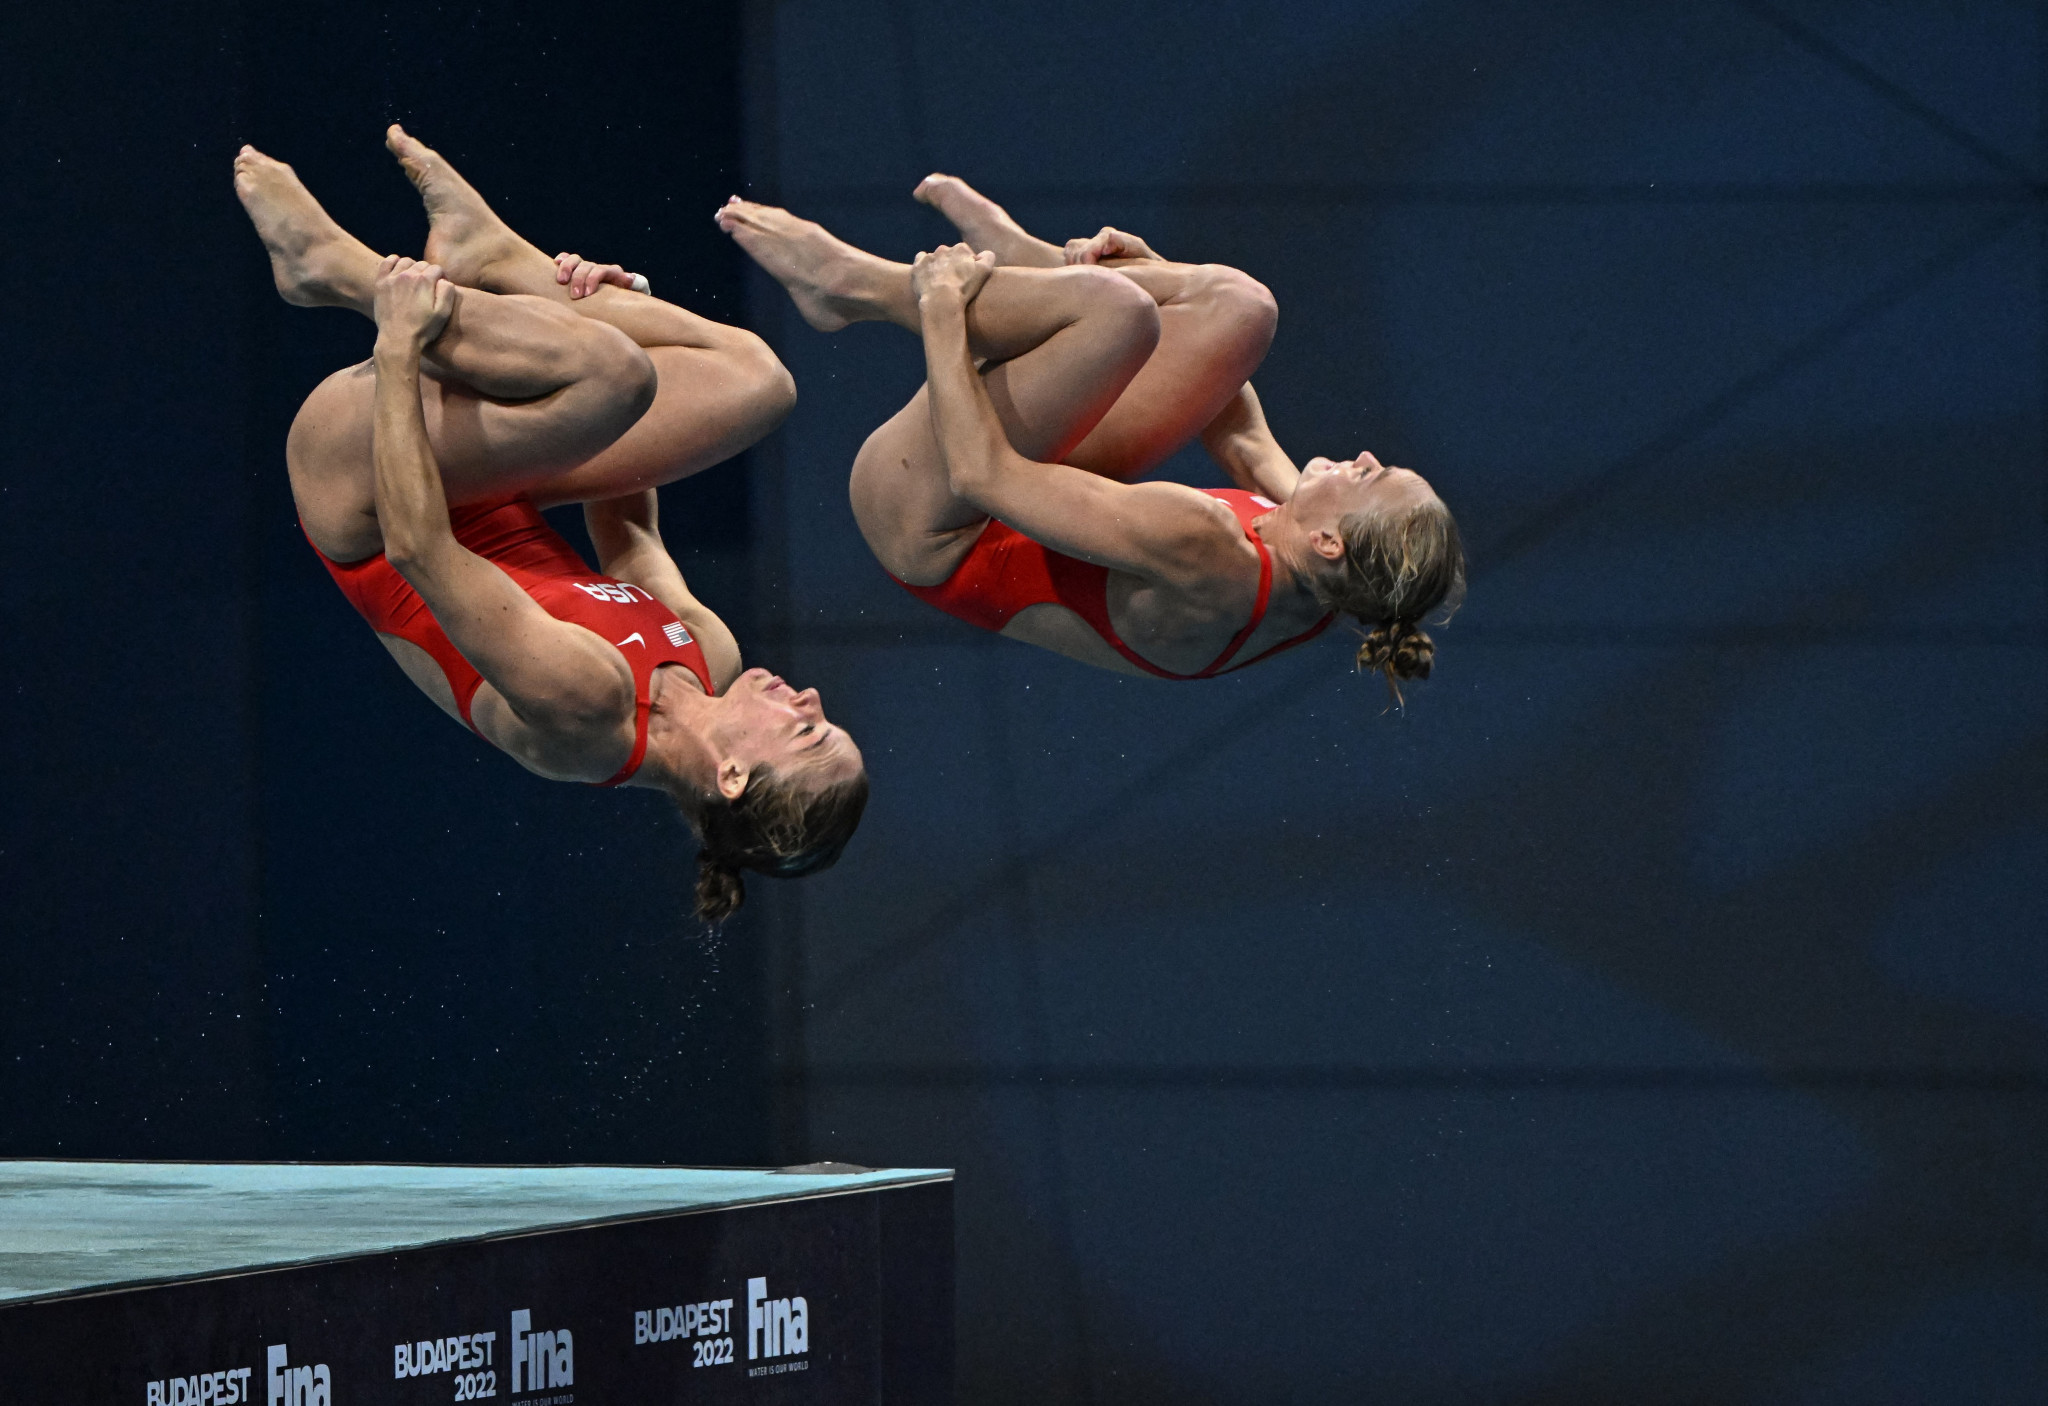 Silver in the women's 10m platform synchronised event went to Delaney Schnell and Katrina Young of the United States ©Getty Images